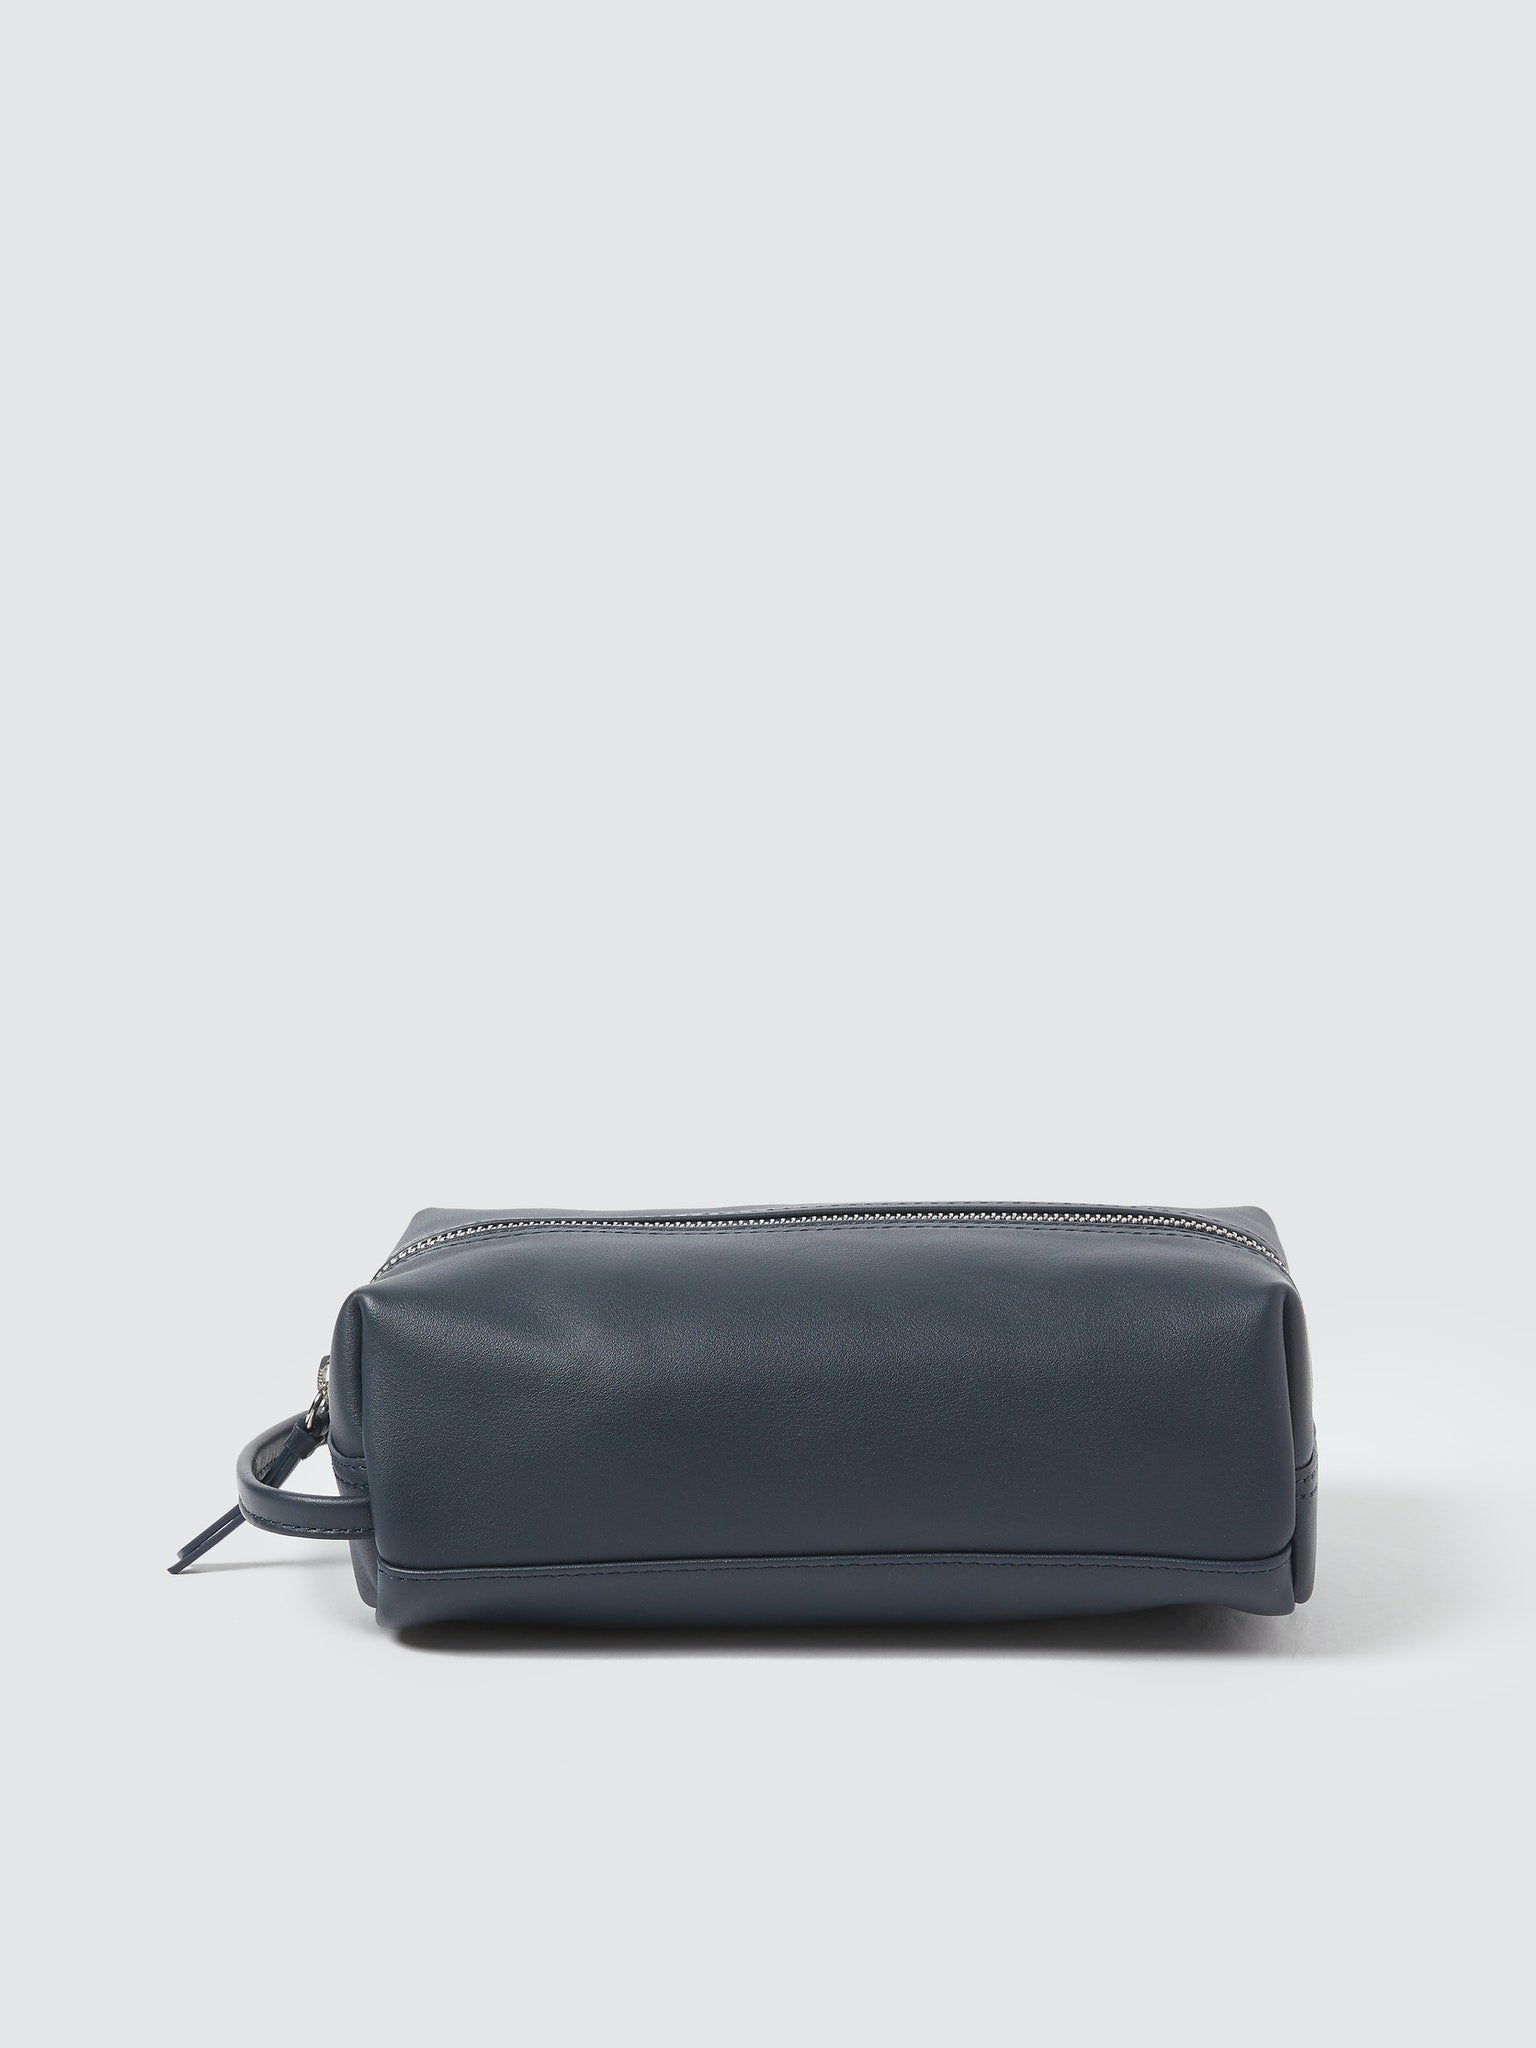 Royce Leather + Compact Toiletry Bag